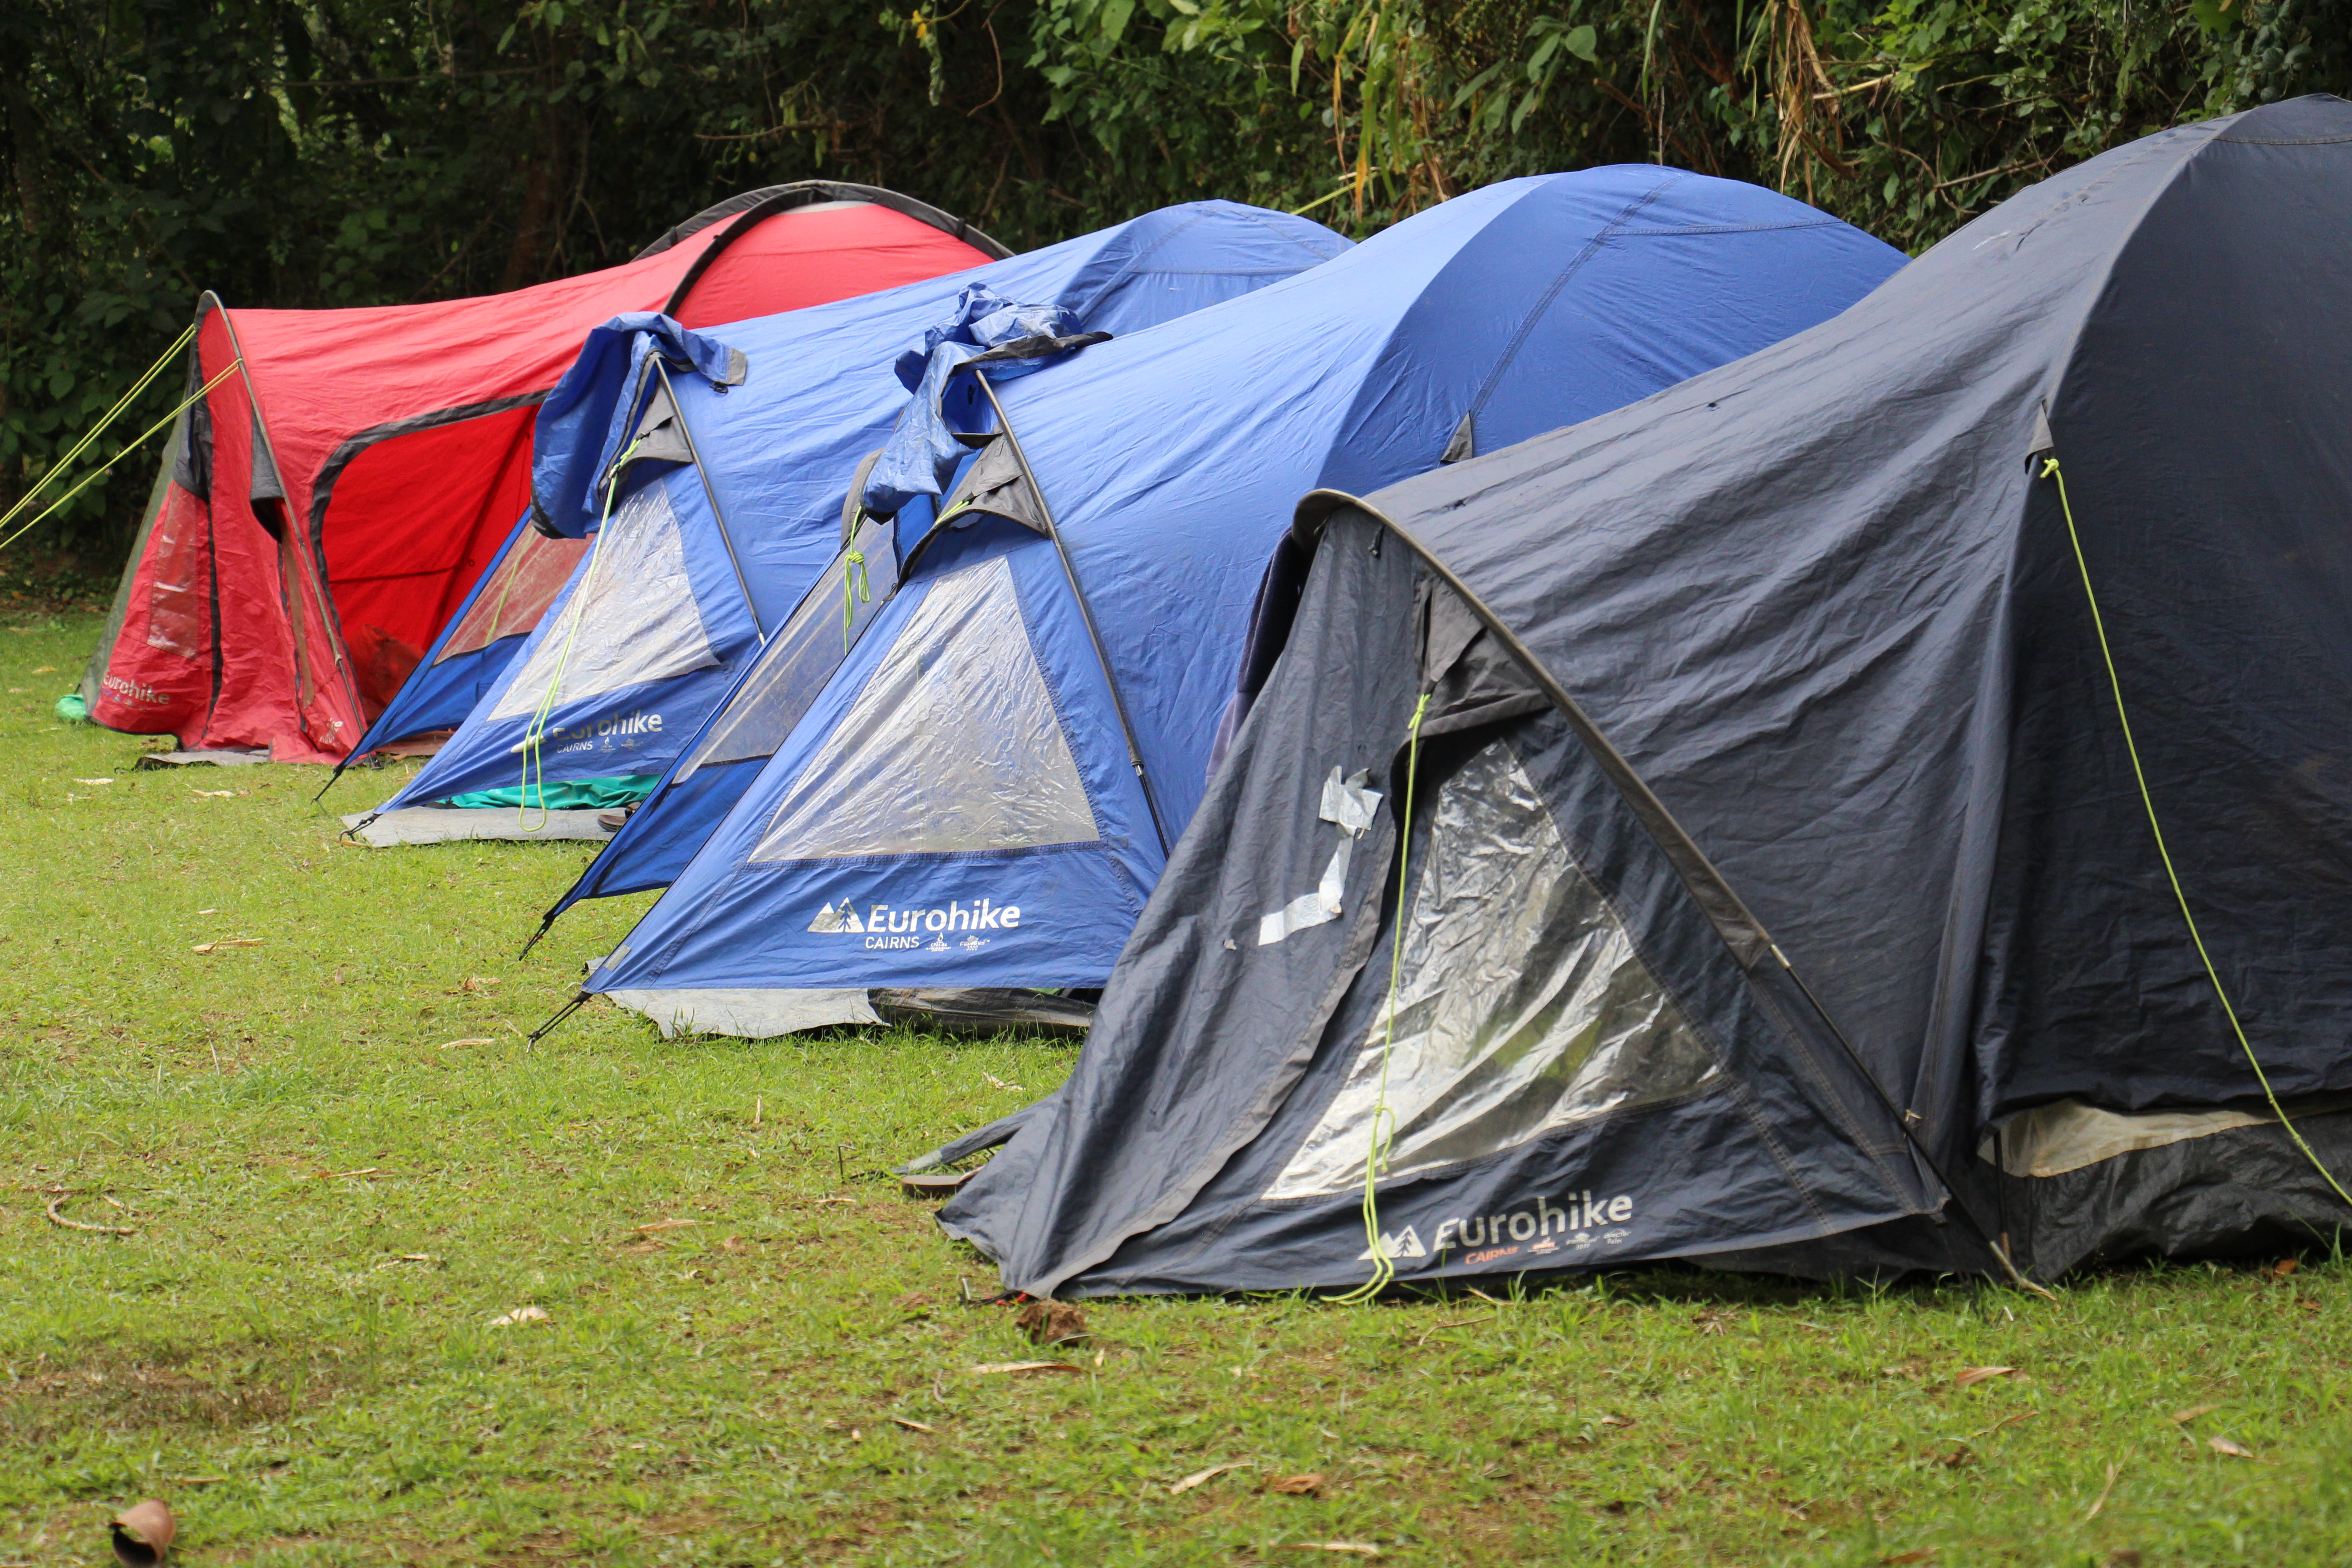 PRIVATE TENTS